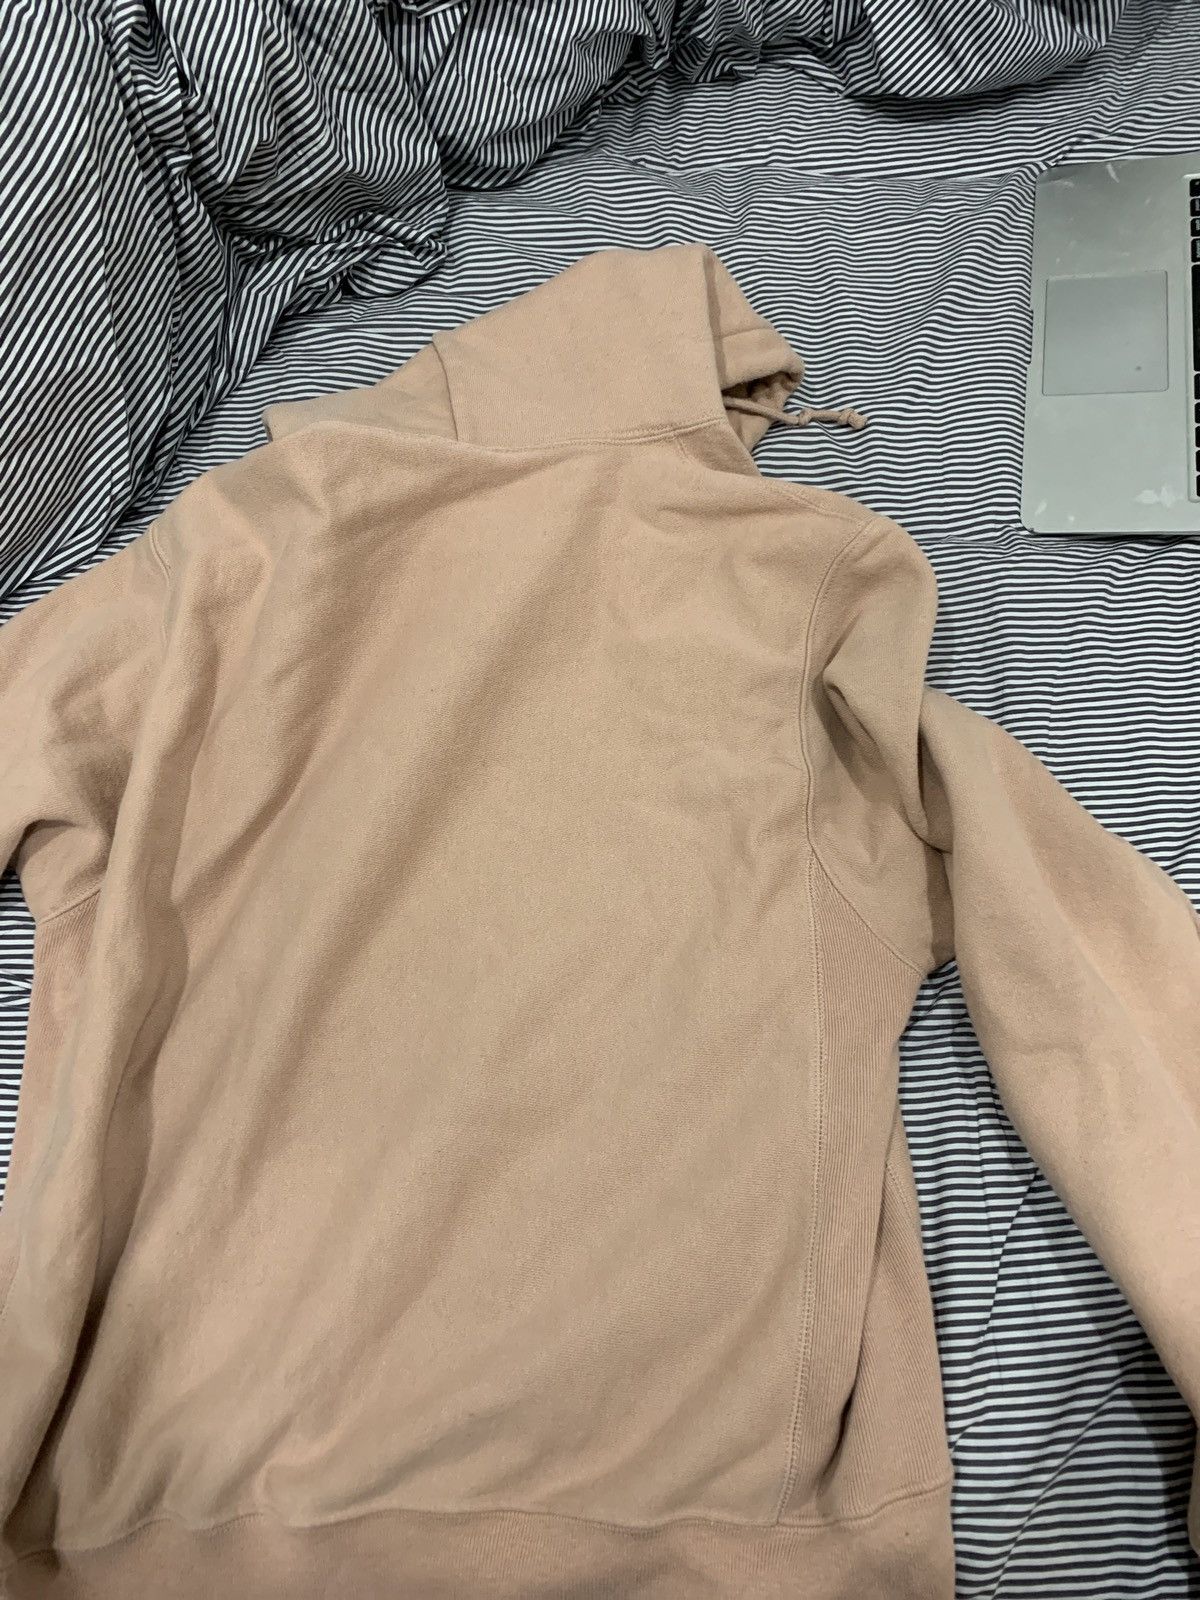 Champion Rose Gold Champion Hoodie Size US M / EU 48-50 / 2 - 5 Preview